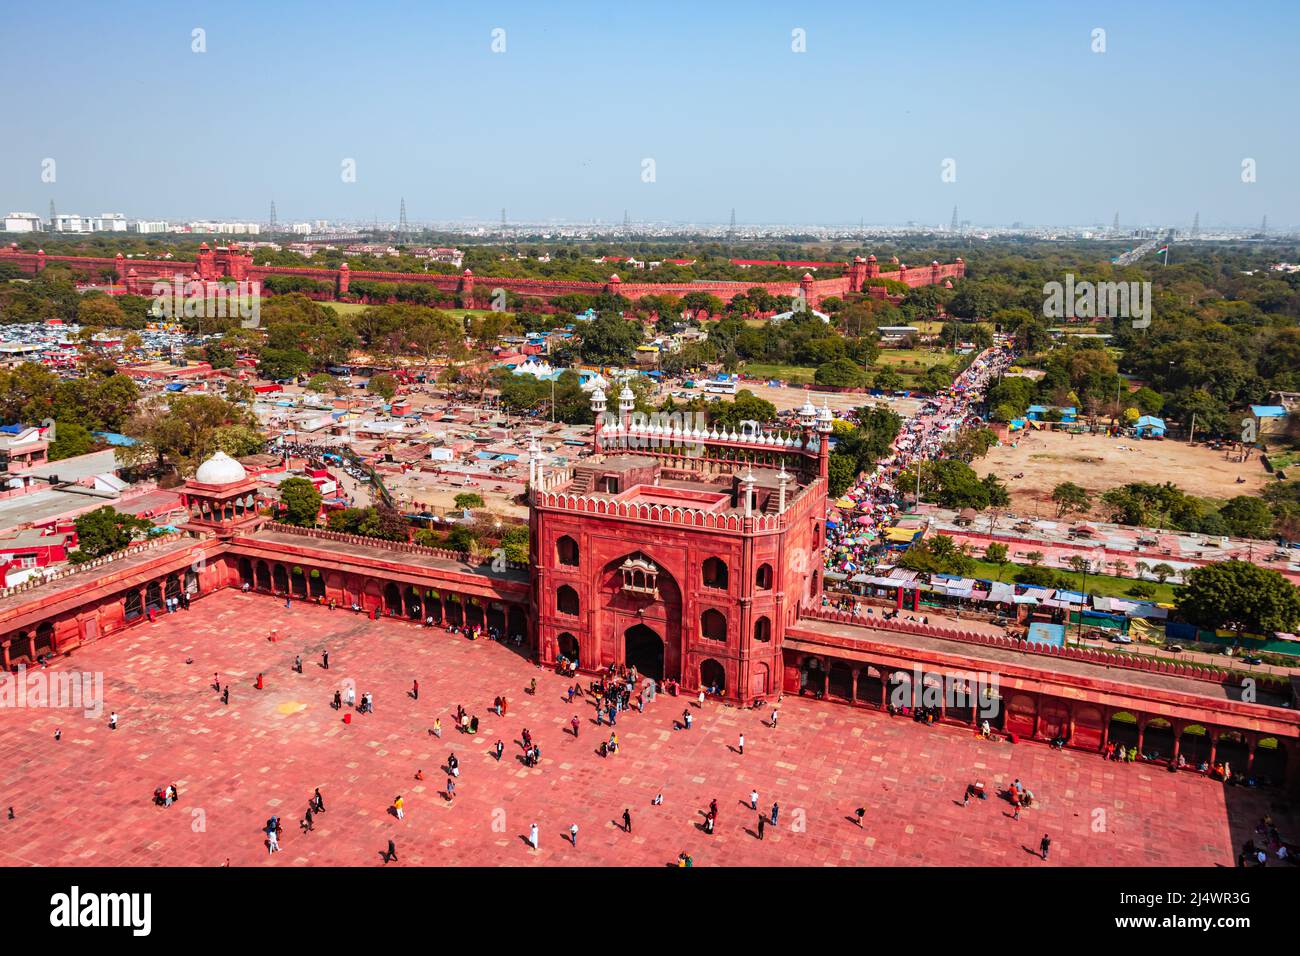 ancient mosque vintage entrance gate with people at morning from unique angle image is taken at jama masjid delhi india on Mar 30 2022. Stock Photo